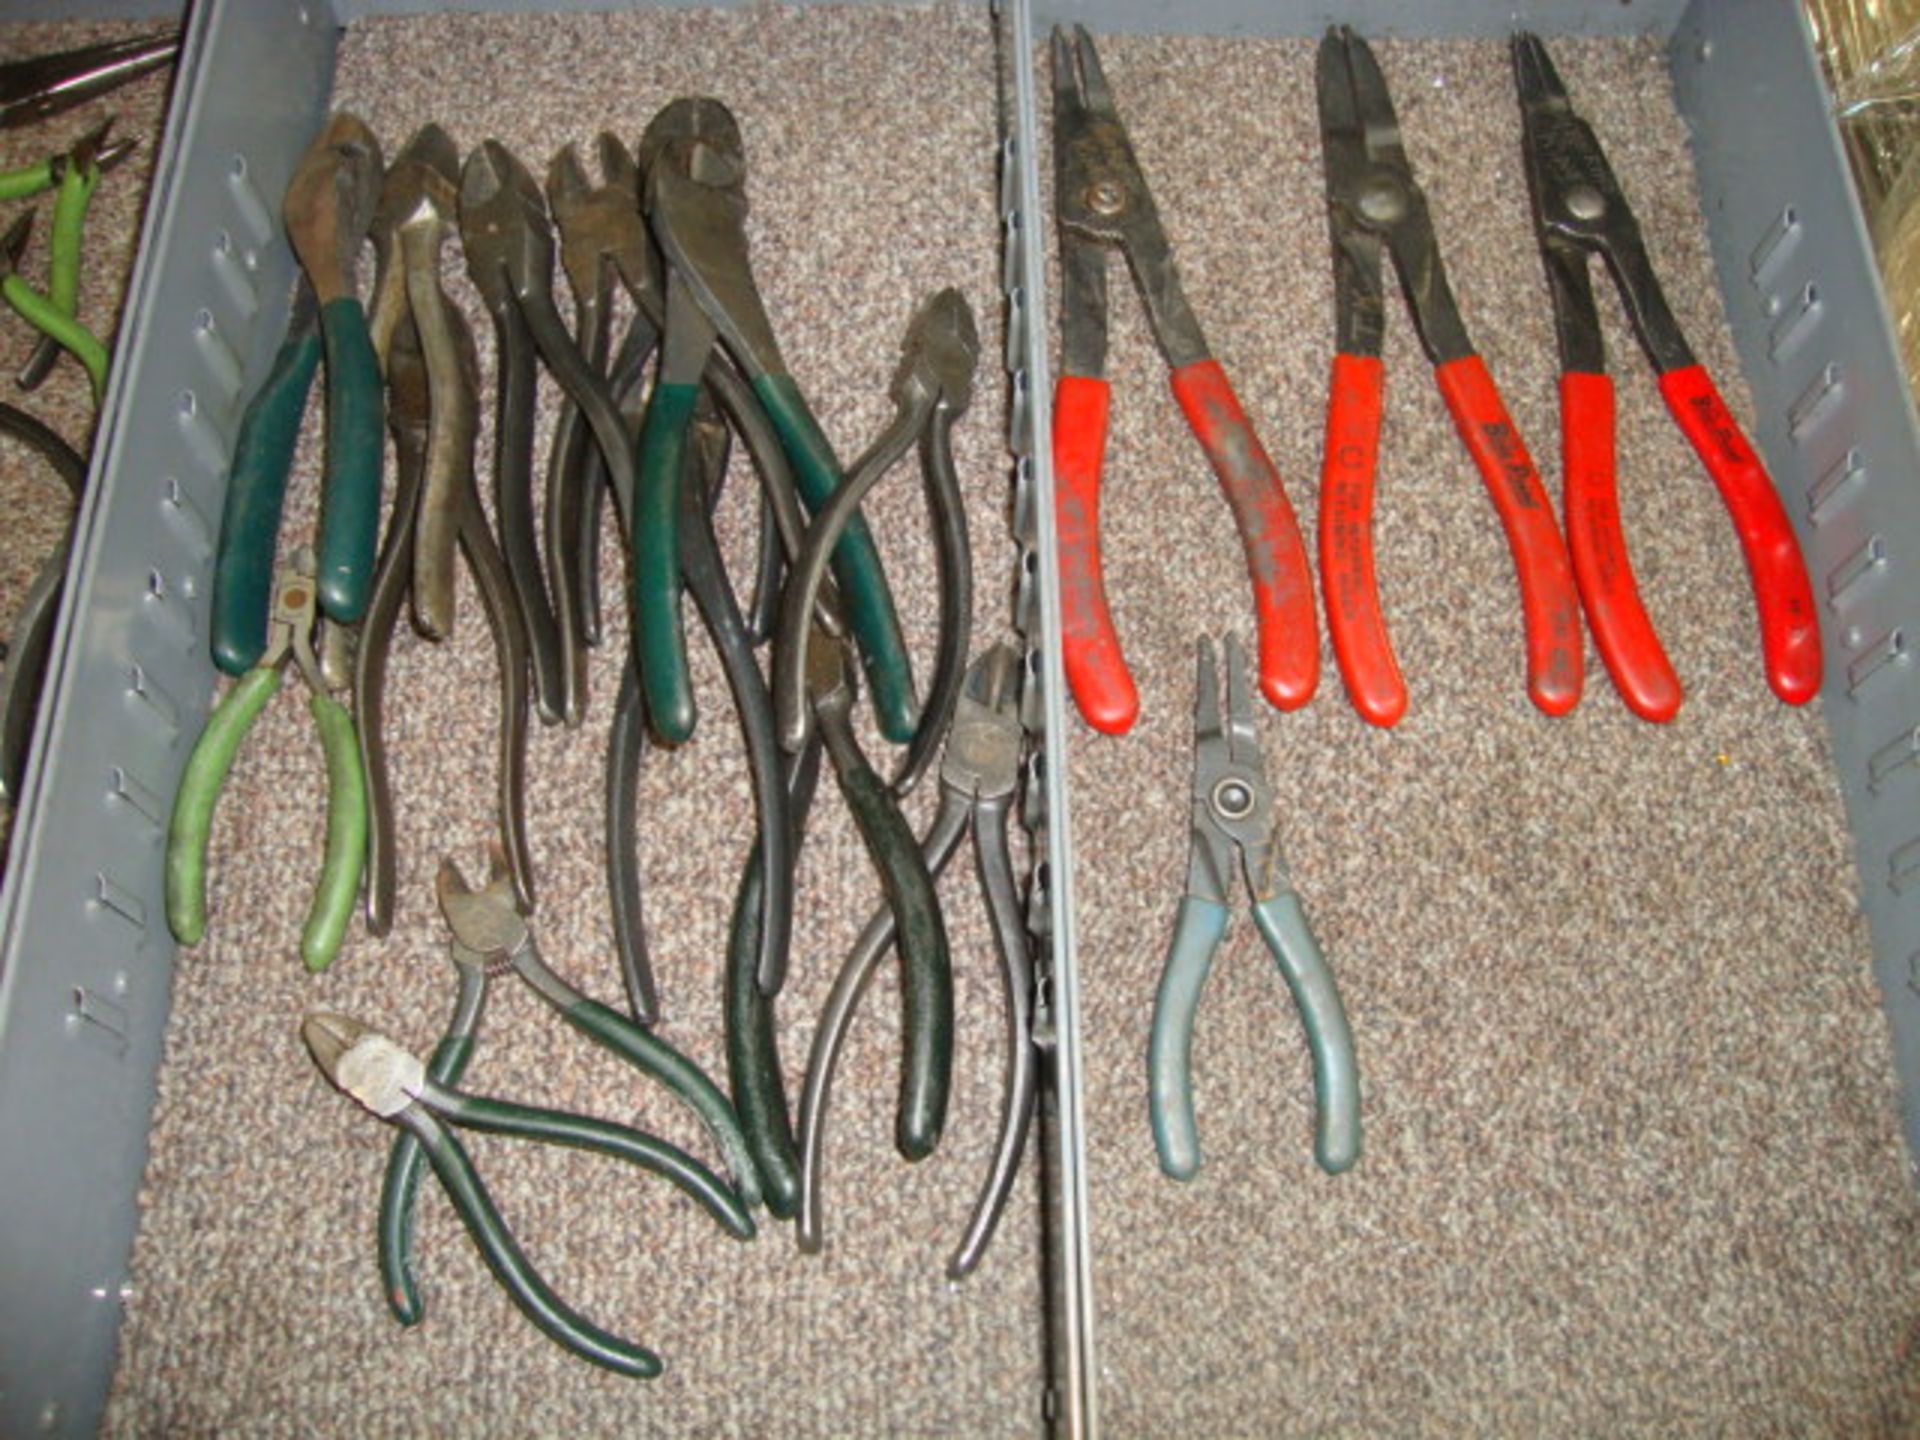 Large Lot of Adjustable Pliers, Wire Cutters, Snap Ring Pliers, etc. NOTE-Tools Only- No Drawers - Image 3 of 3